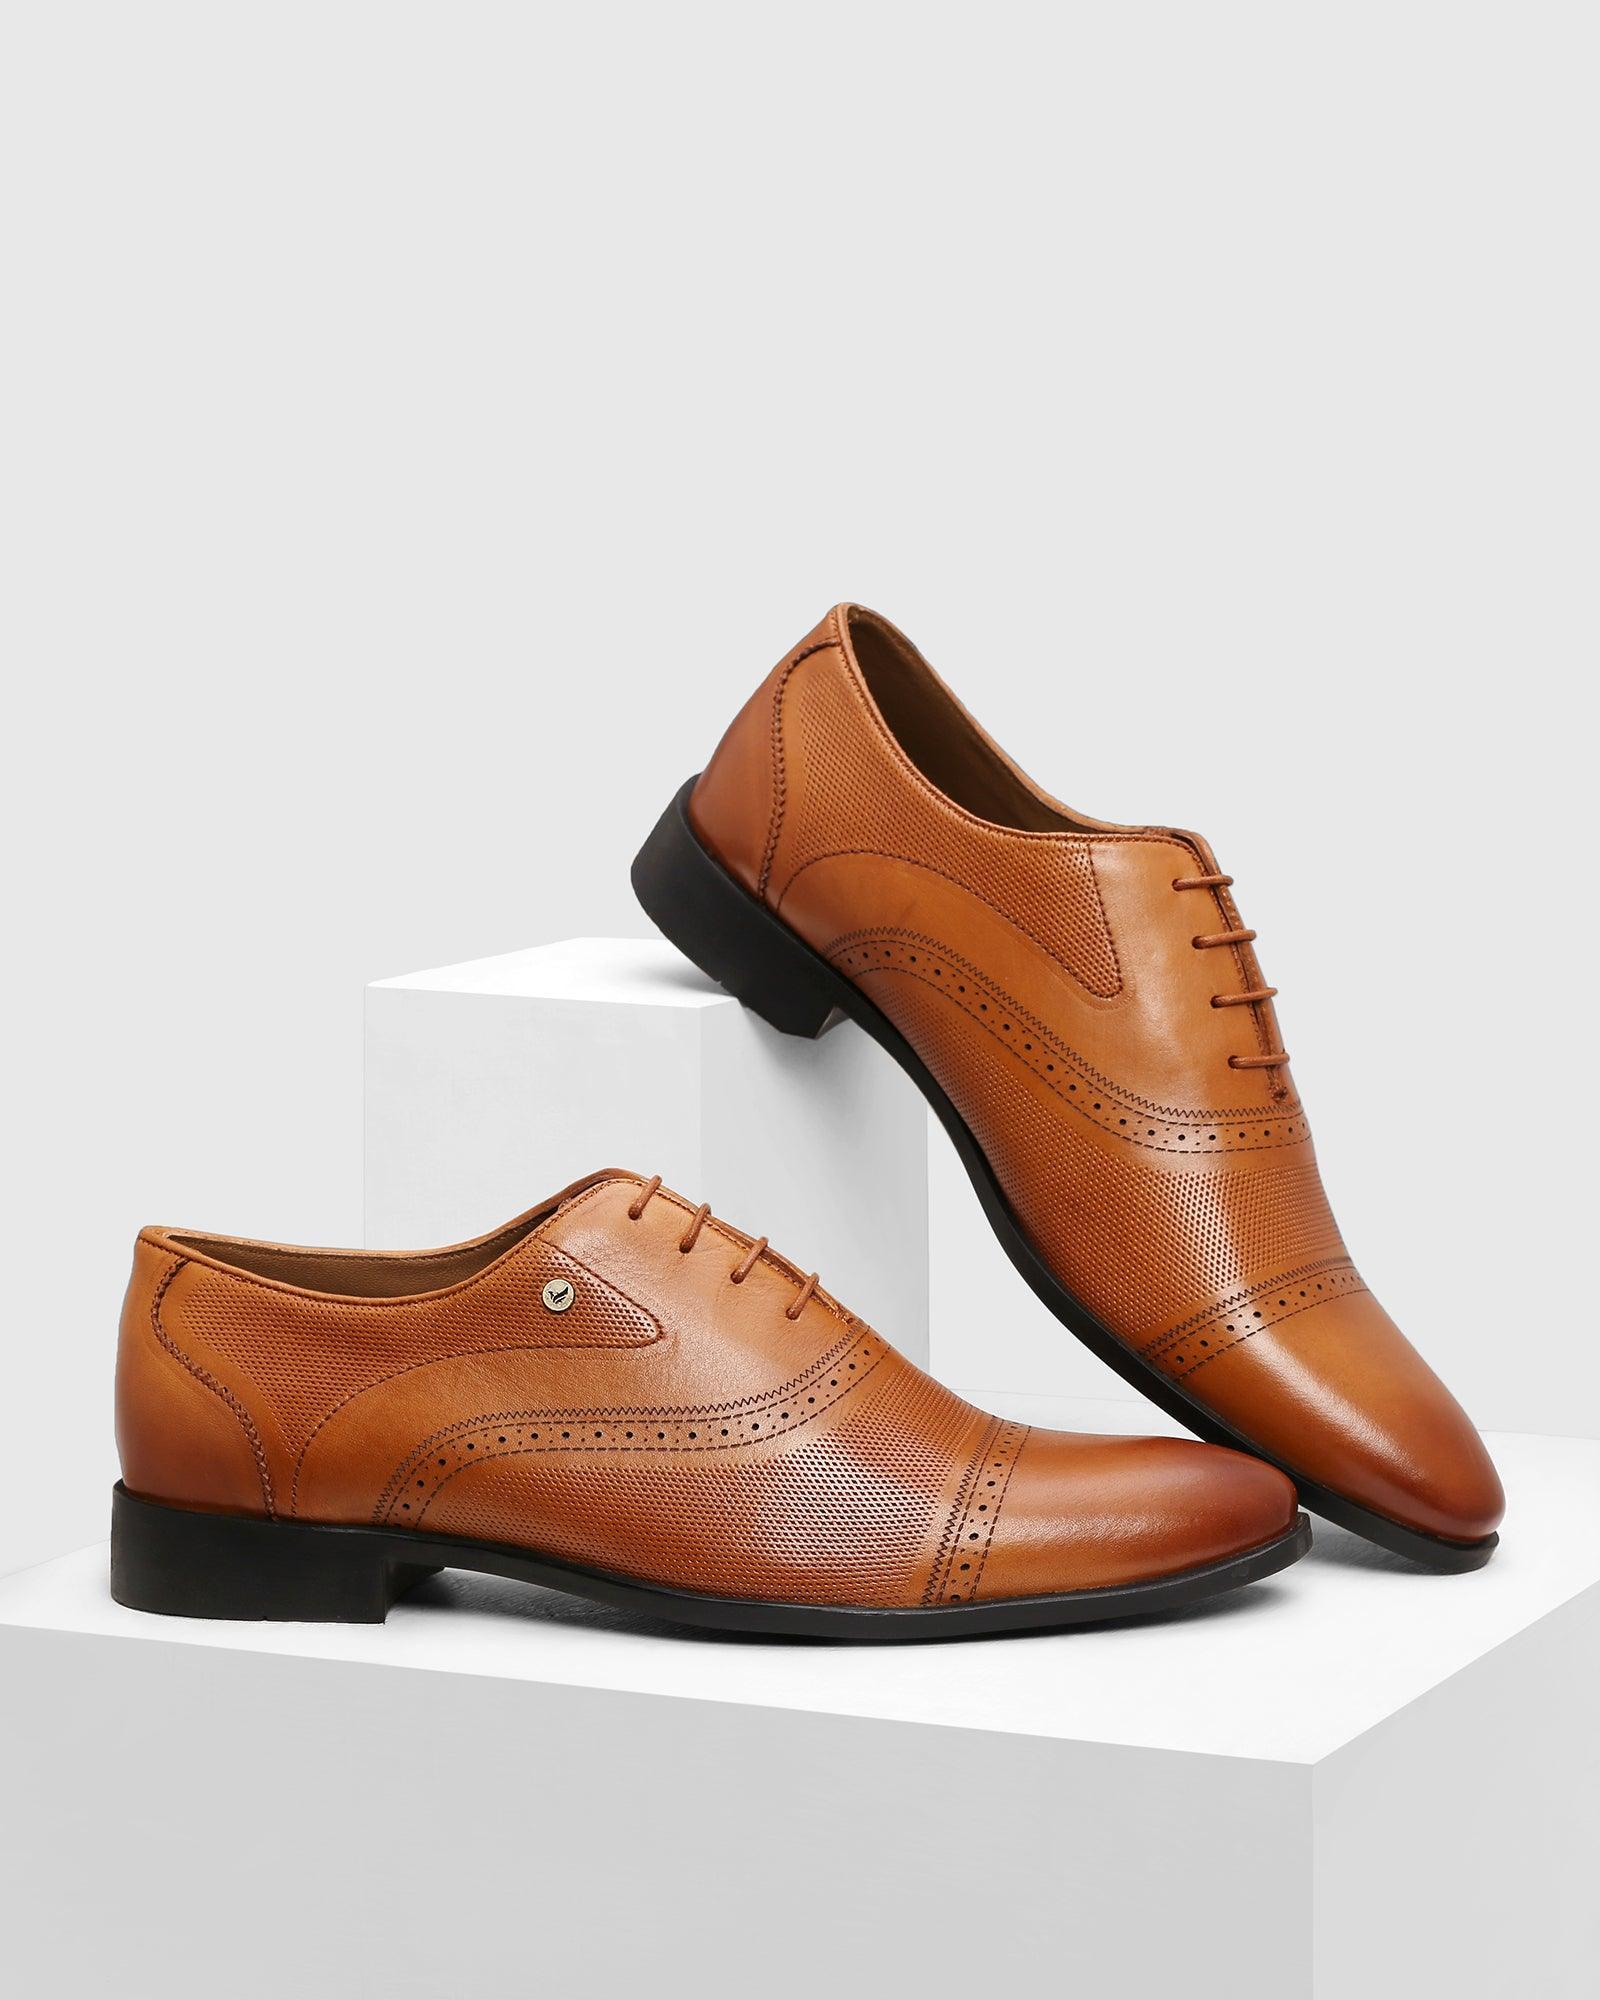 must-haves-leather-tan-textured-oxford-shoes---lewis